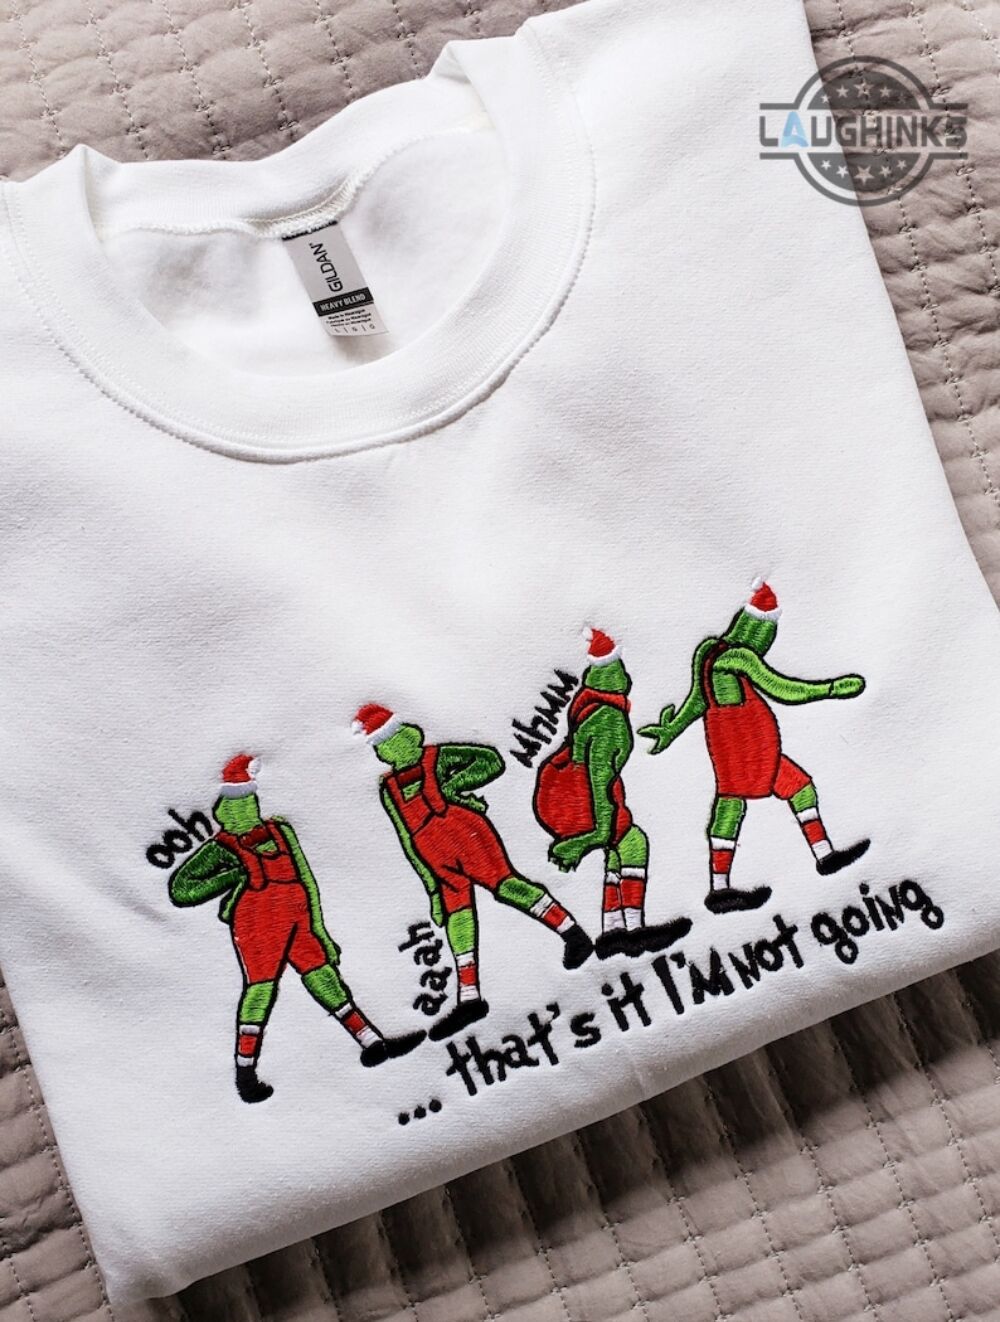 embroidered grinch sweatshirt t shirt hoodie unisex the the the the grinch christmas embroidery grinch stole christmas 2023 tshirt cindy lou who grinch costume laughinks 1